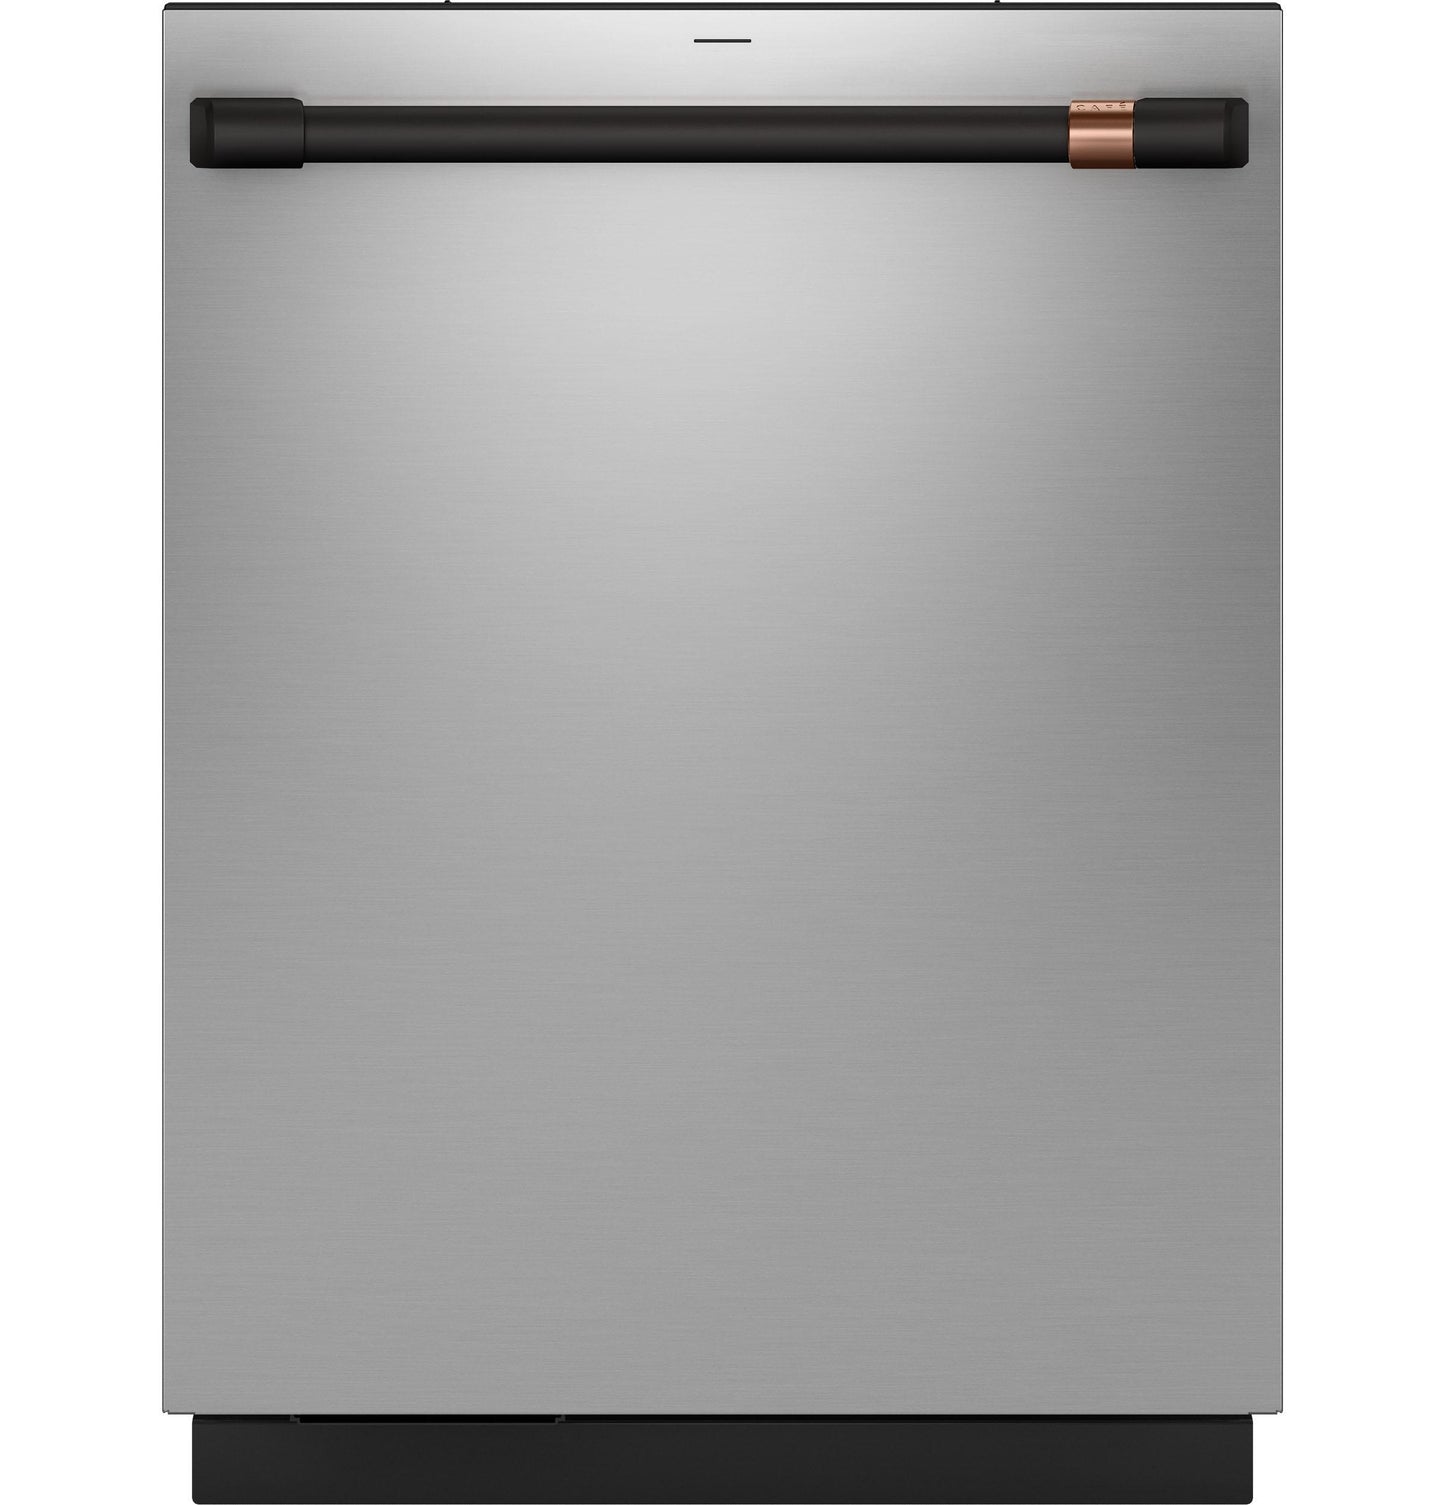 Cafe CDT858P2VS1 Café&#8482; Customfit Energy Star Stainless Interior Smart Dishwasher With Ultra Wash Top Rack And Dual Convection Ultra Dry, 44 Dba